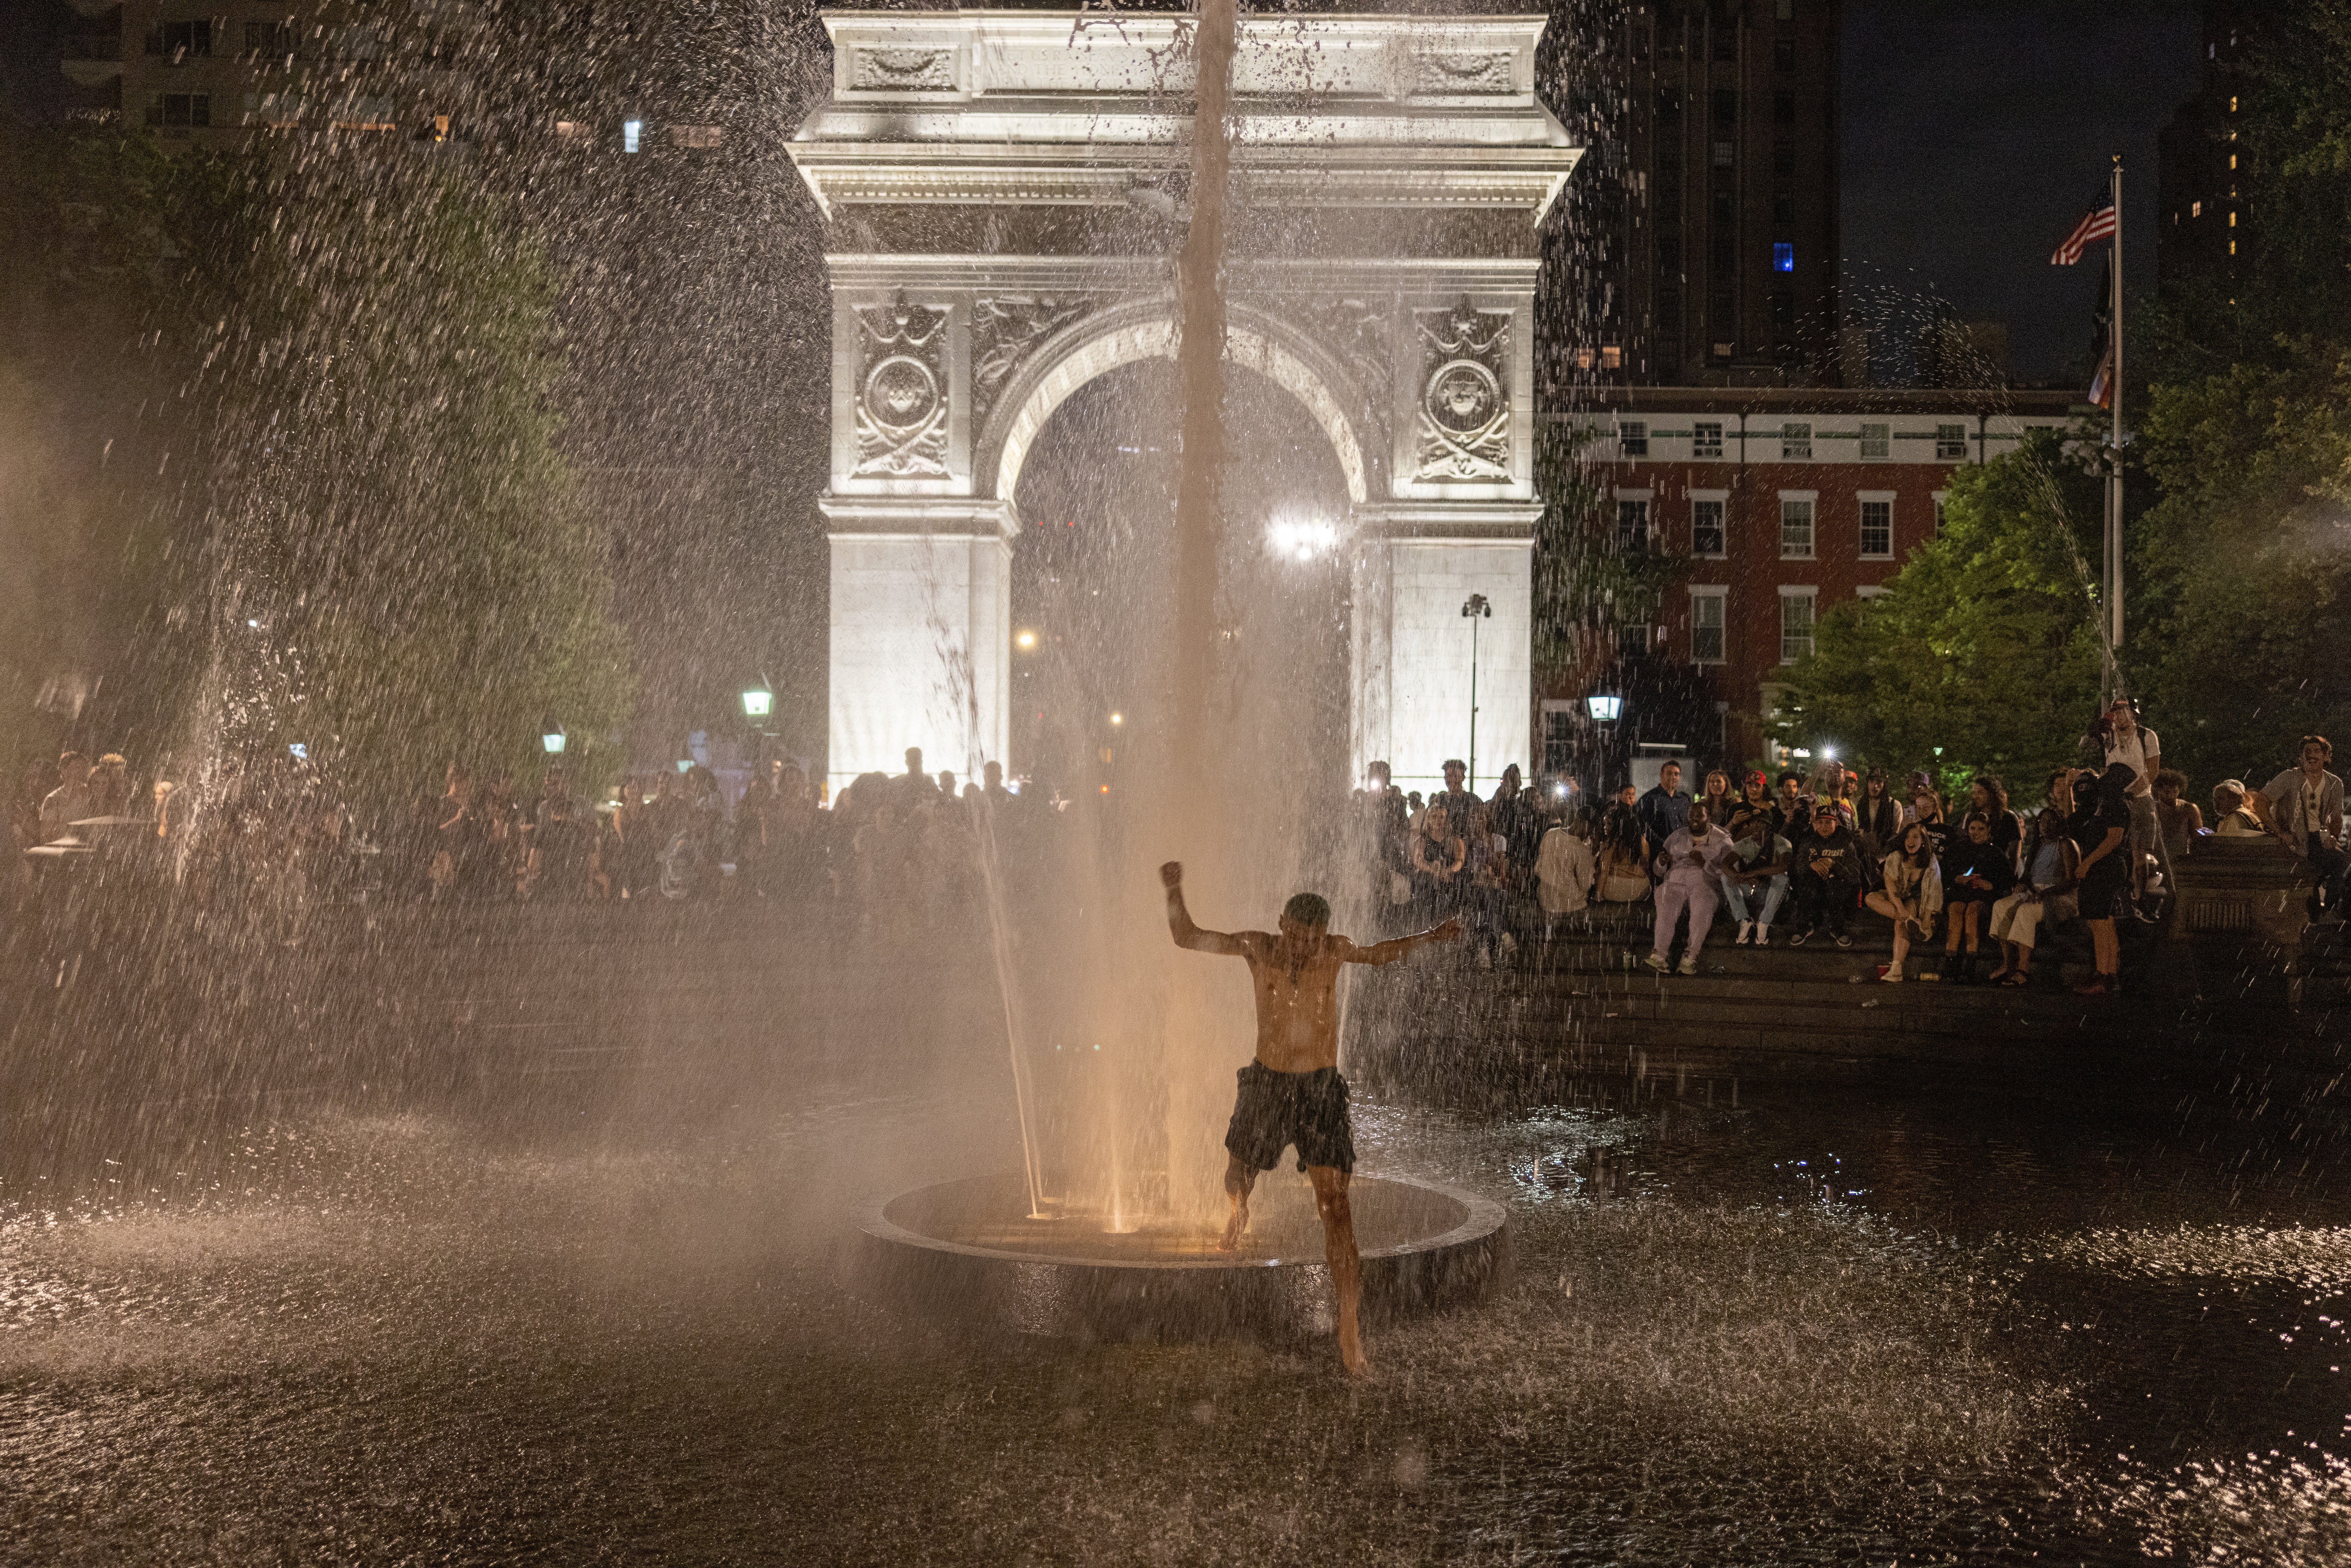 Partygoers in Washington Square Park run through the fountain drawing cheers from onlookers on June 18, 2021 in New York City